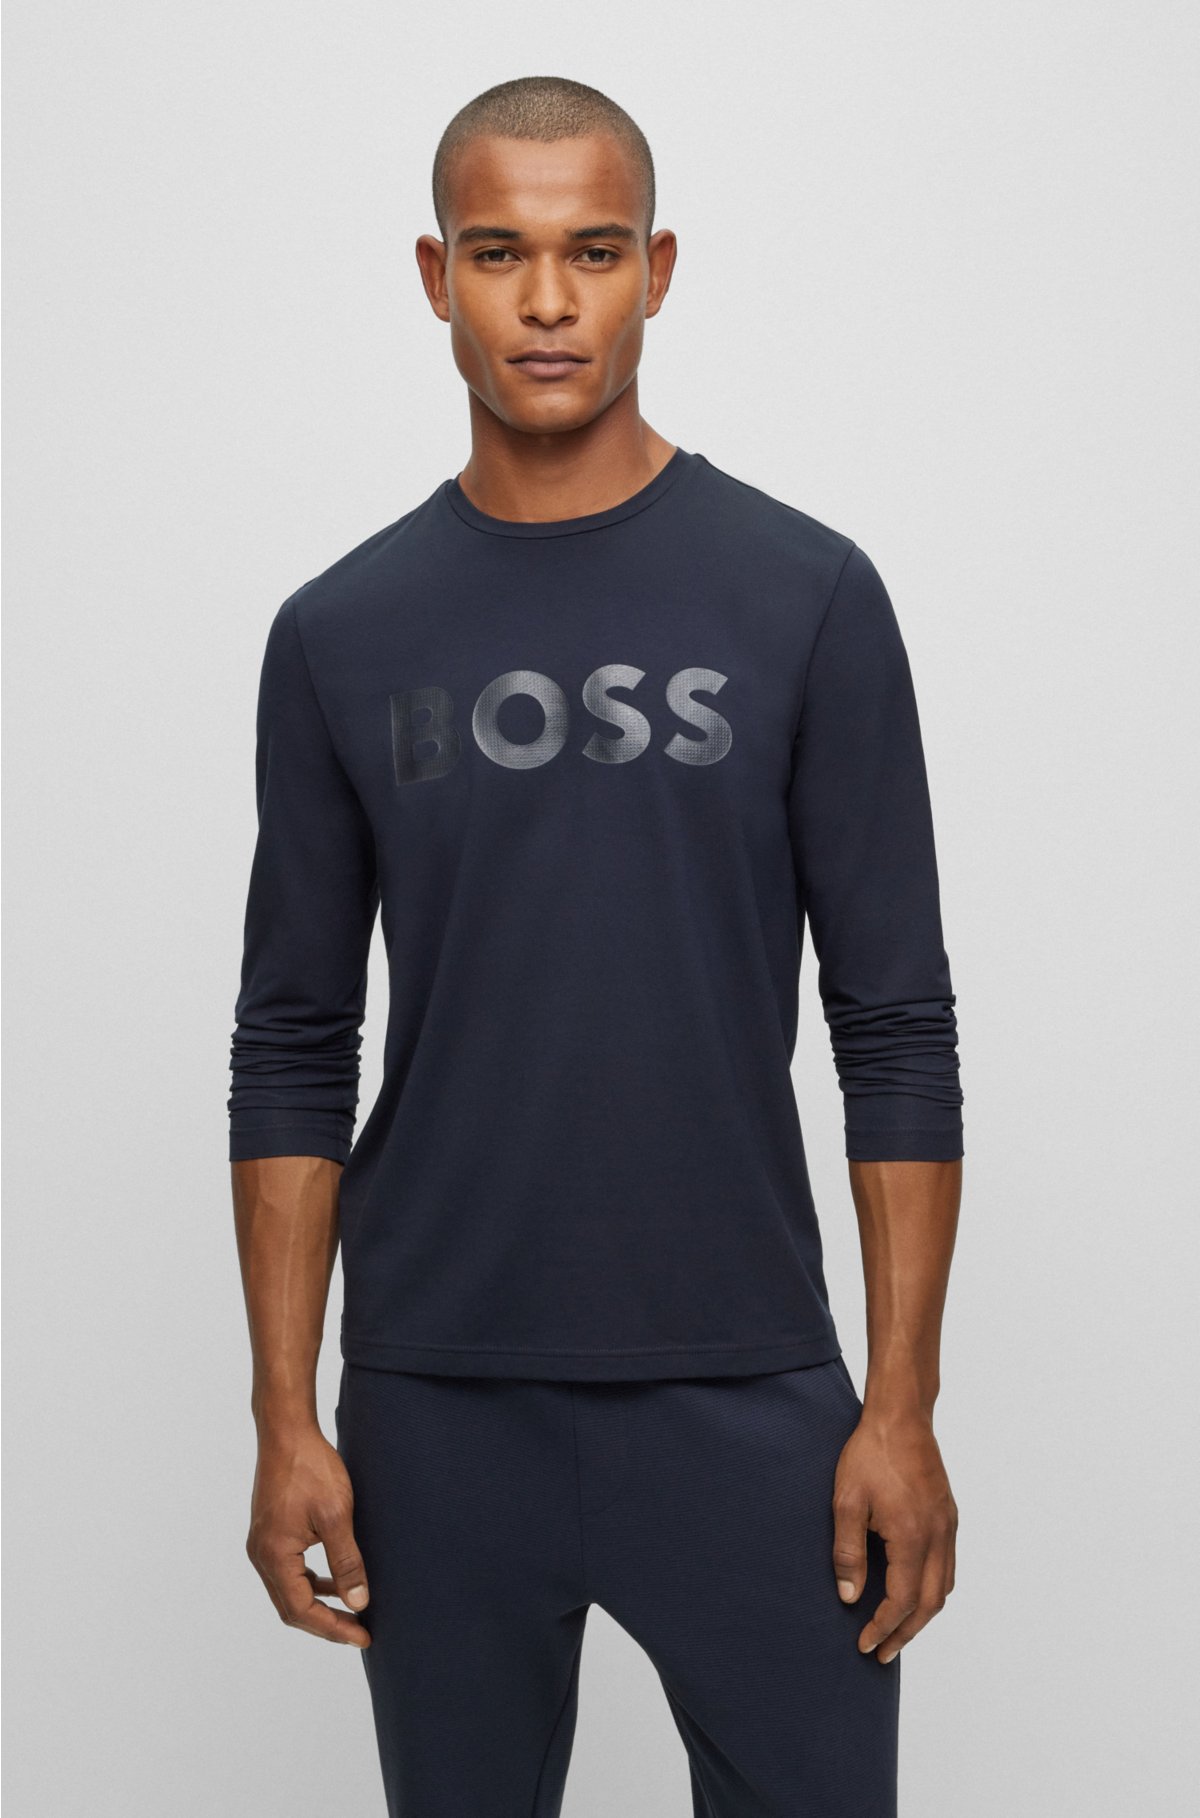 - Stretch-cotton BOSS logo mirror-effect with T-shirt